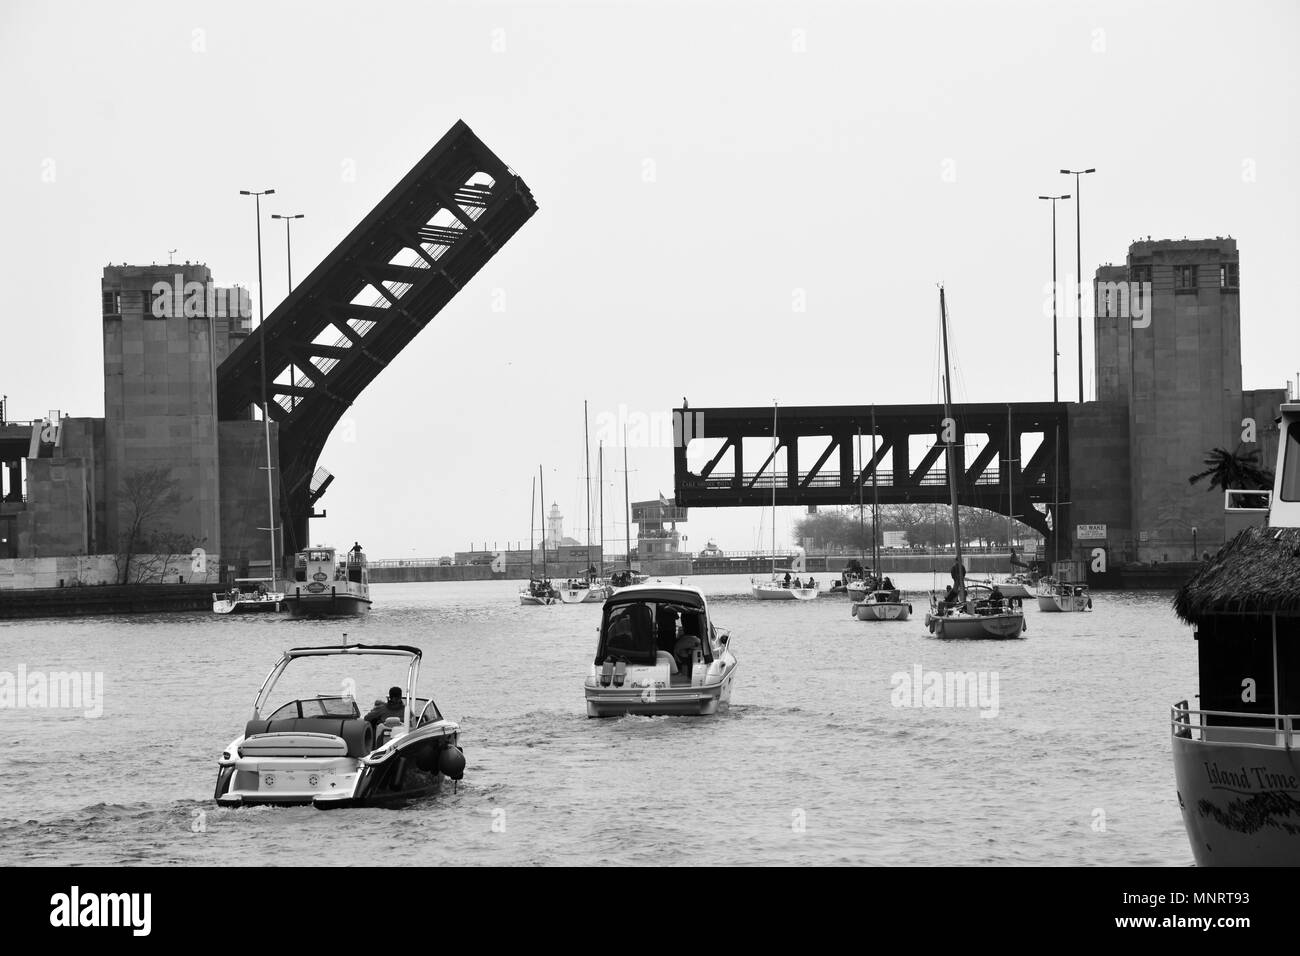 The Lake Shore Drive bridge in Chicago is raised to let sailboats pass during the spring boat run to Lake Michigan. Stock Photo